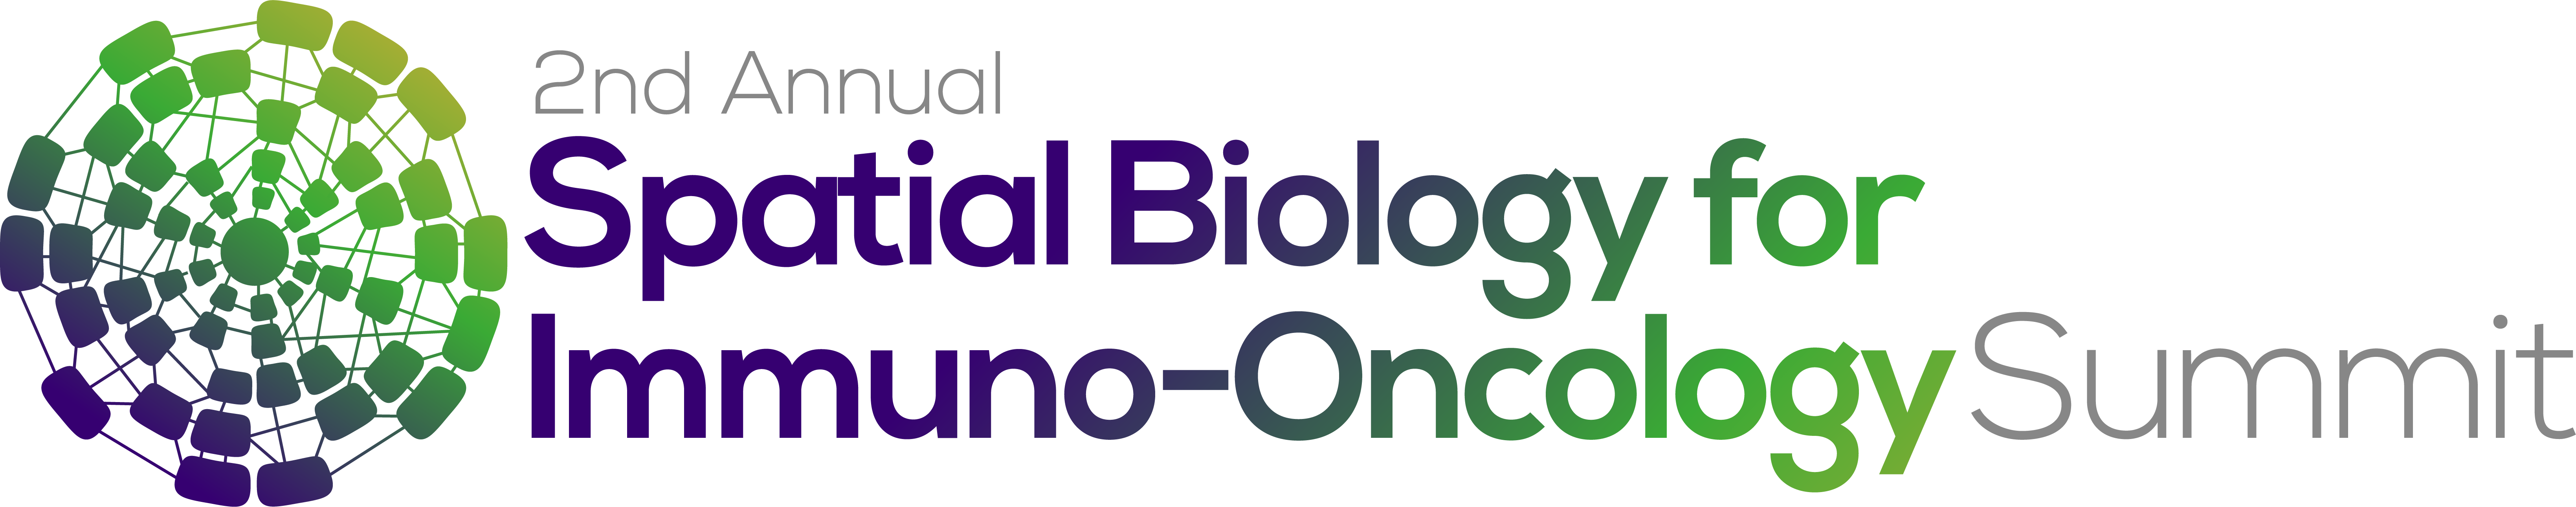 HW230921 2nd Spatial Biology for Immuno-Oncology logo